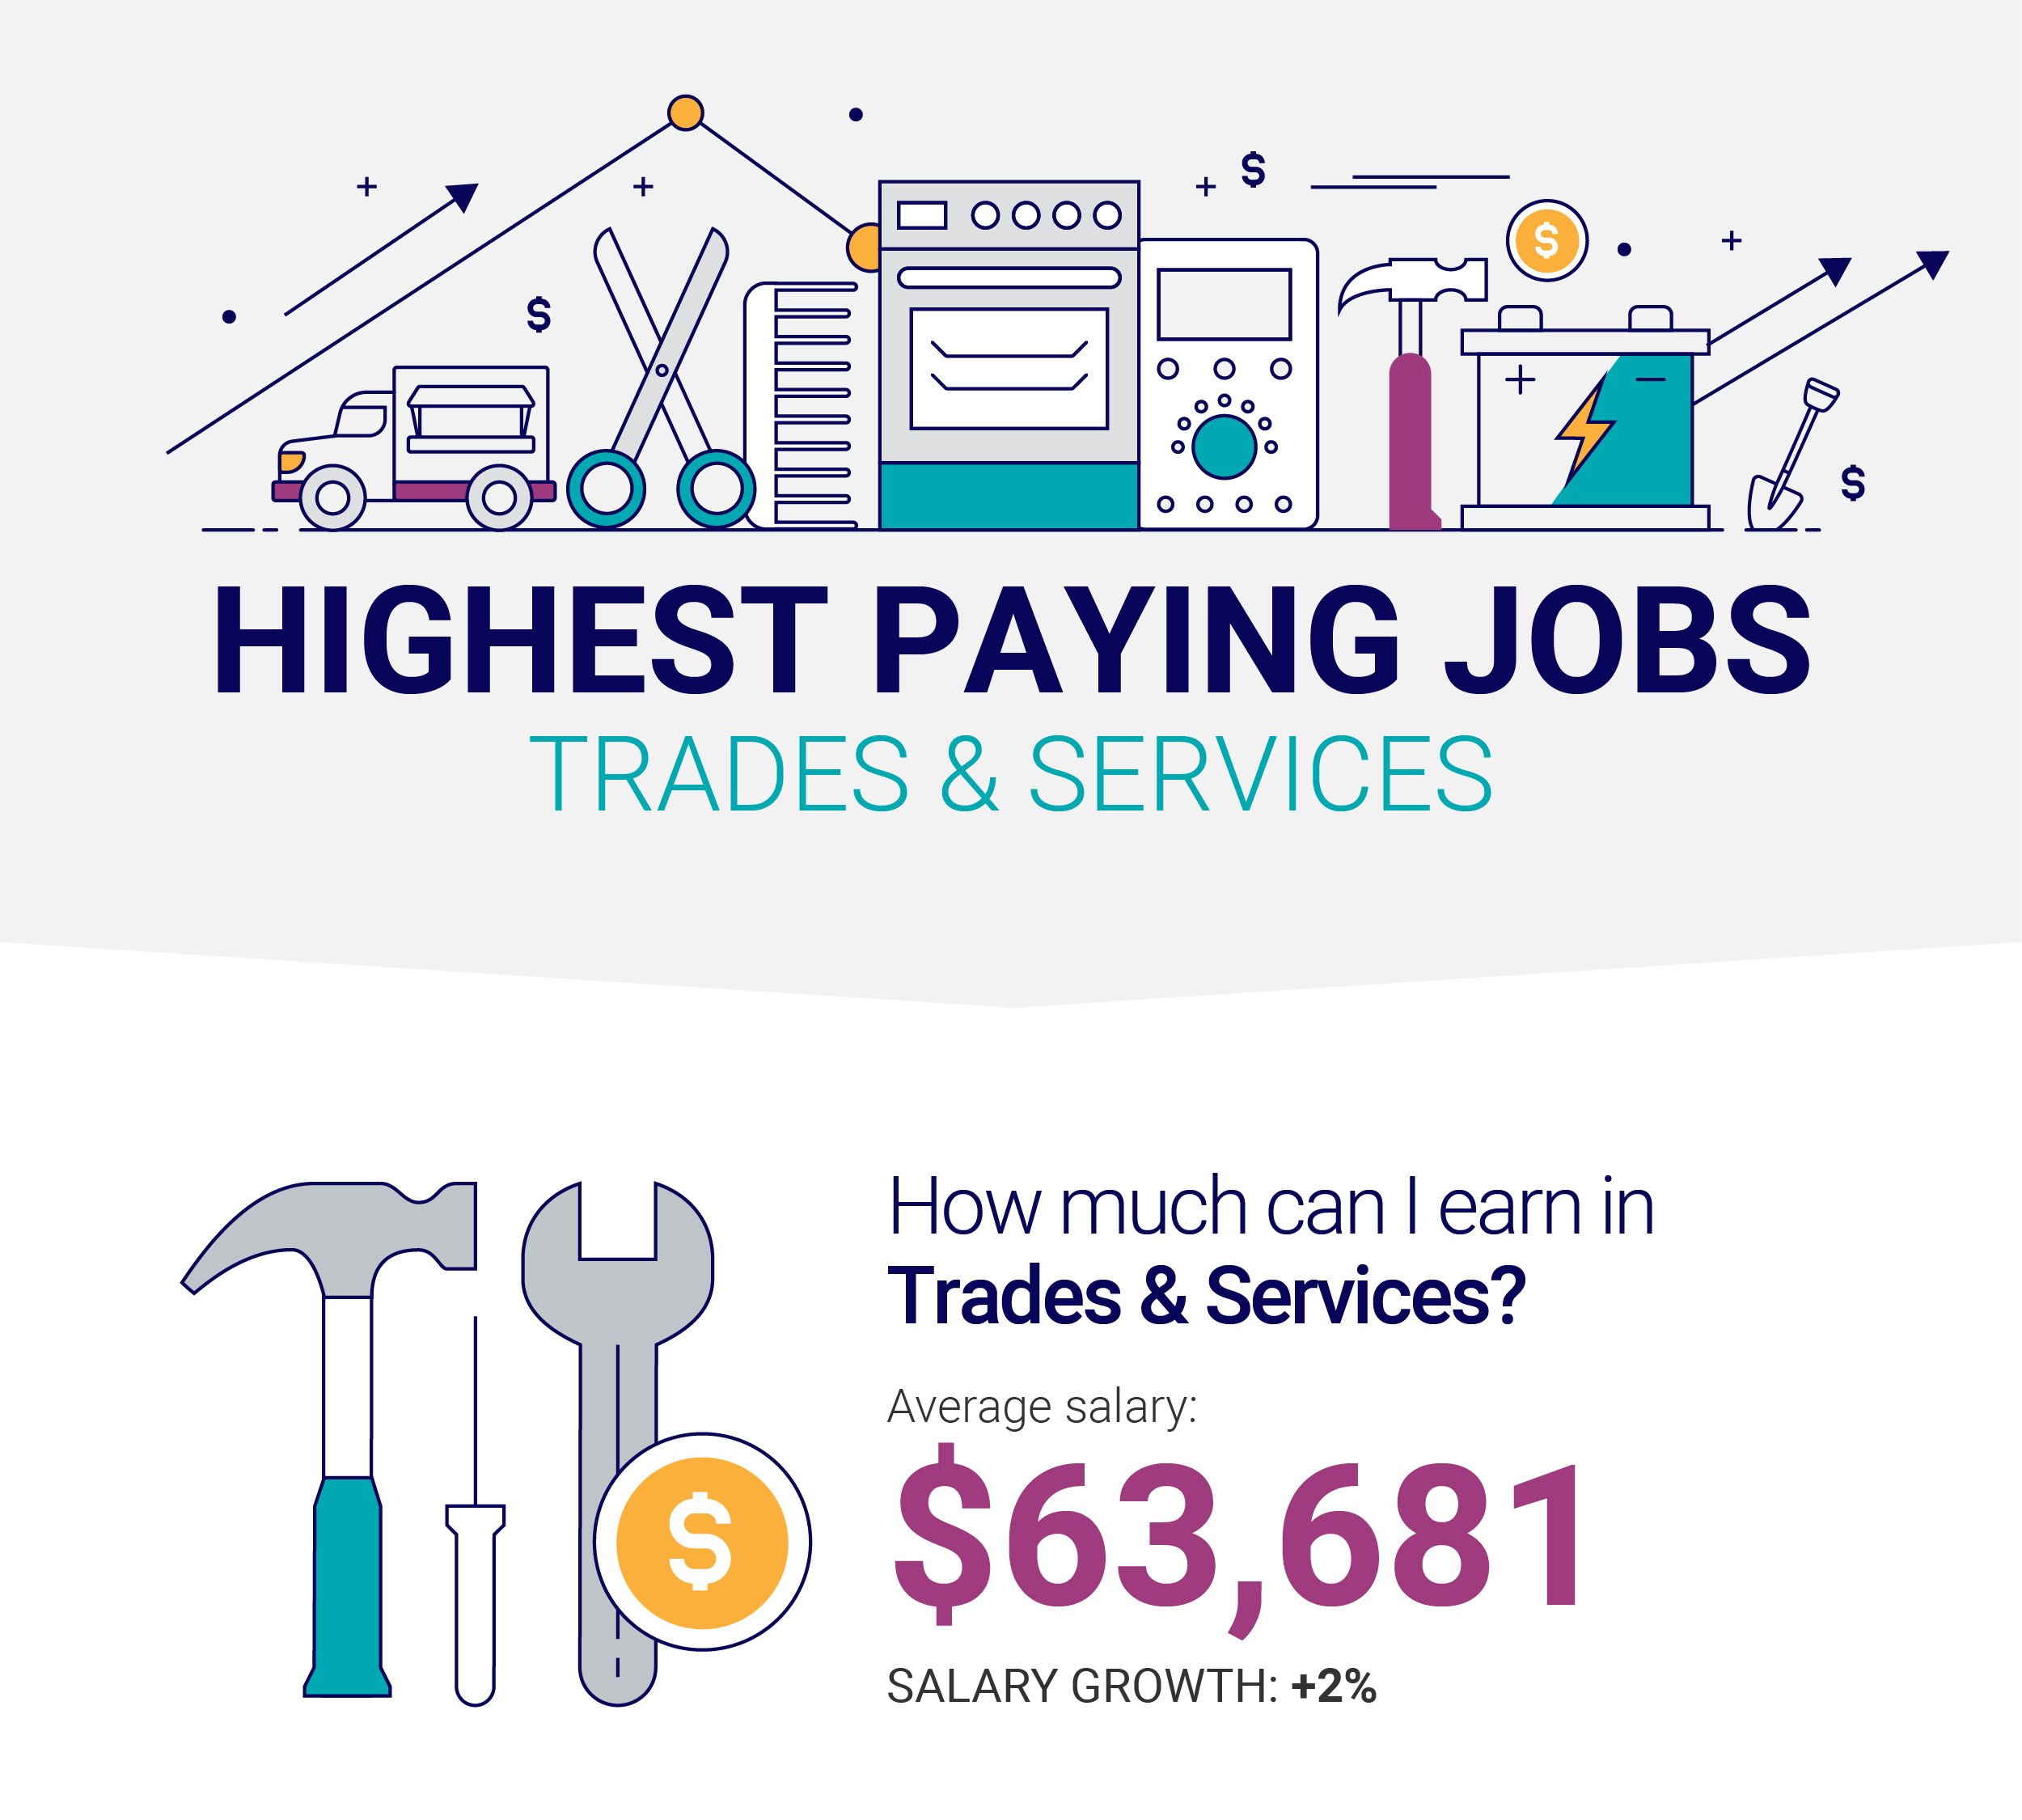 How much can I earn in Trades & Services?